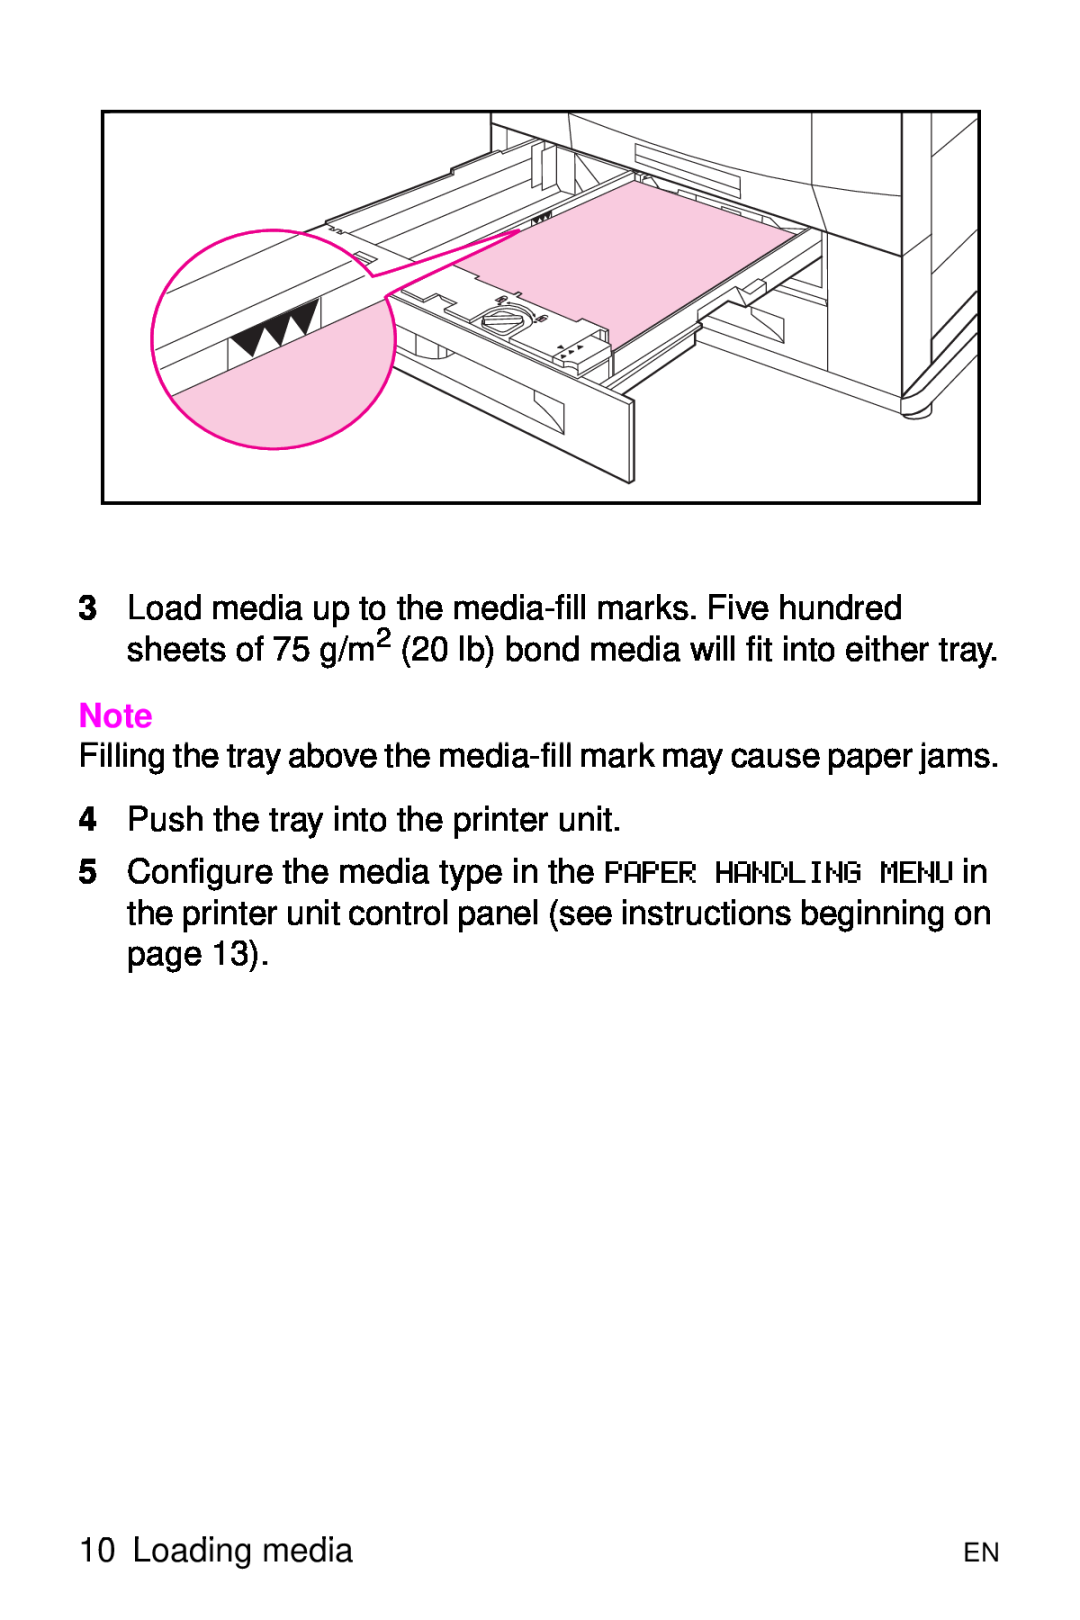 HP 8000 s manual Filling the tray above the media-fill mark may cause paper jams, Push the tray into the printer unit 